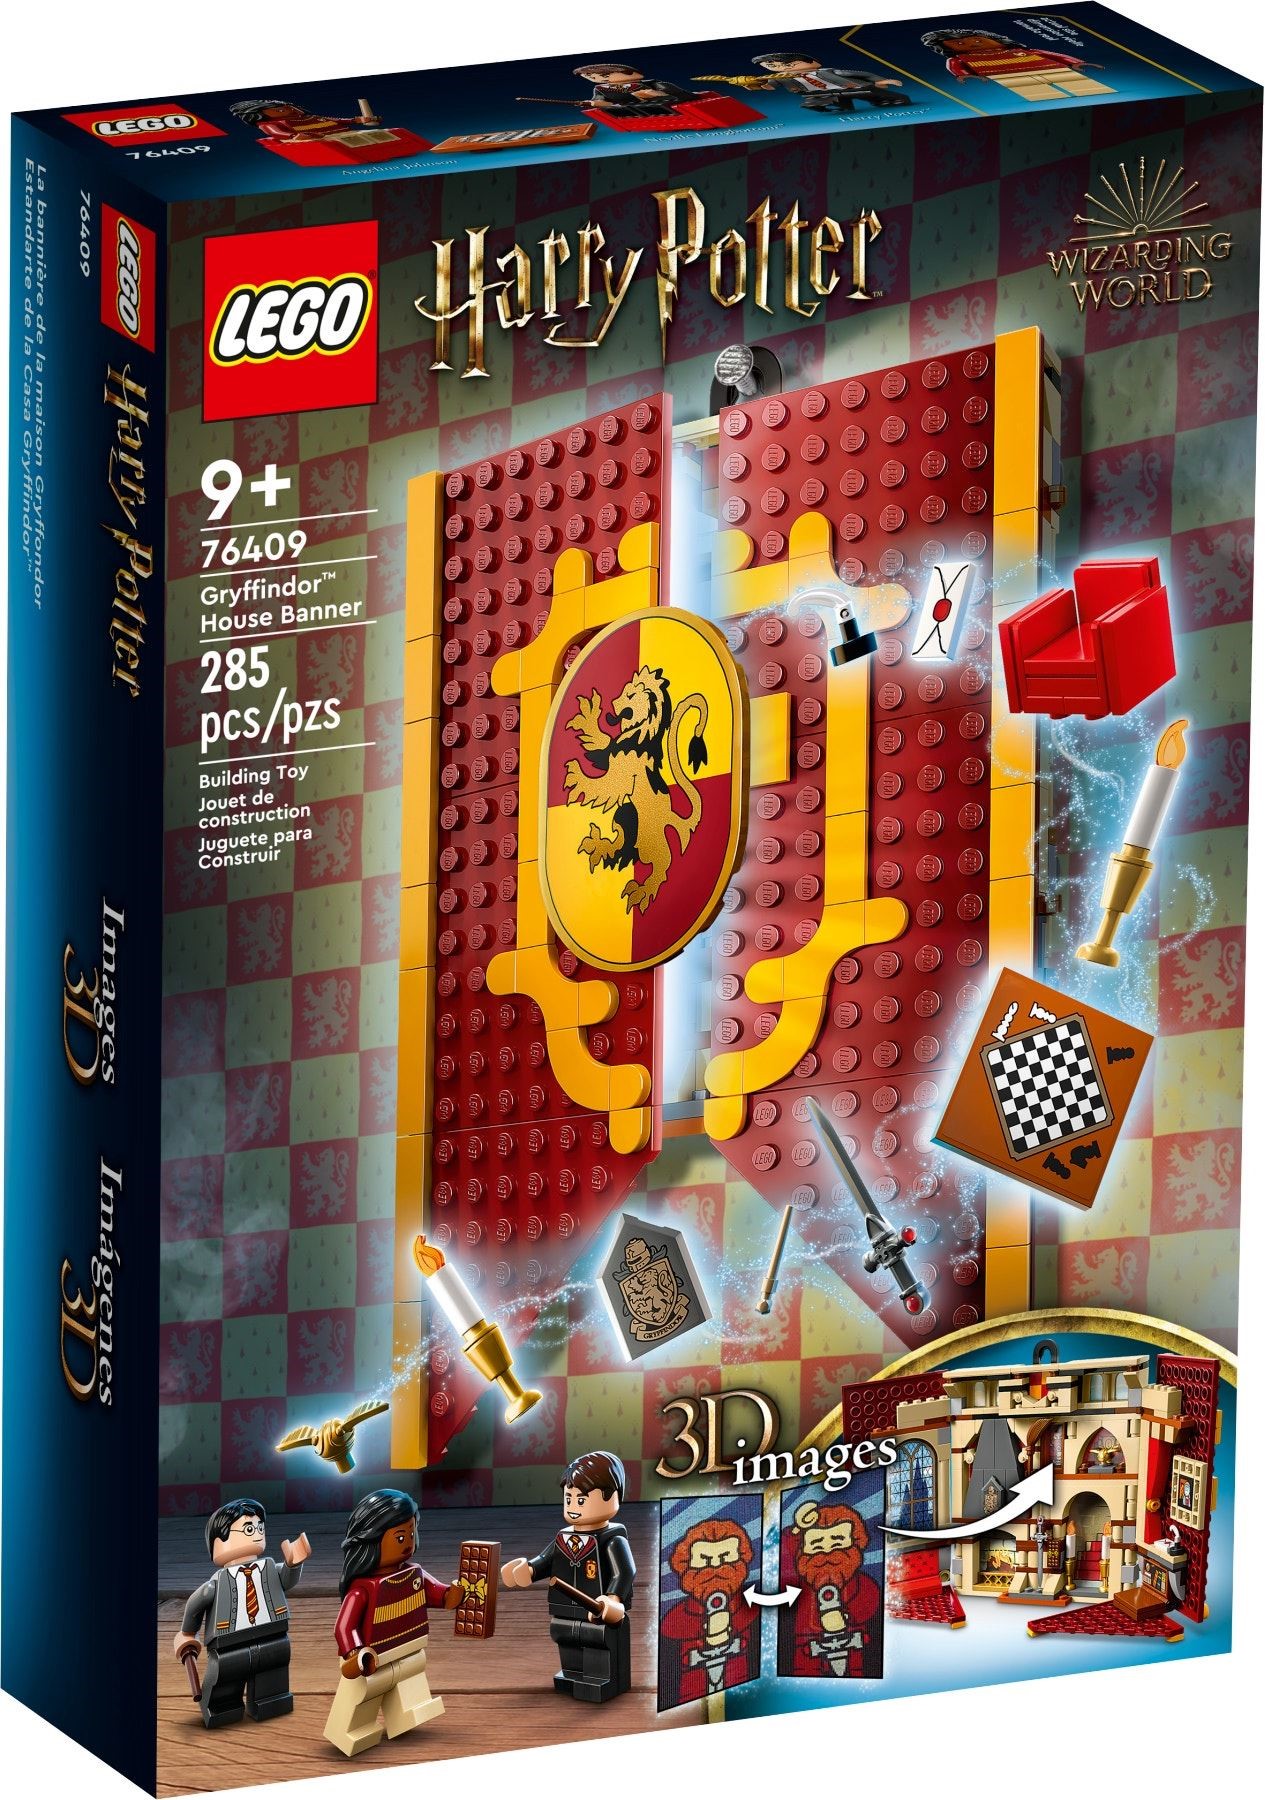 Three LEGO Harry Potter Sets Are Saved from Retirement